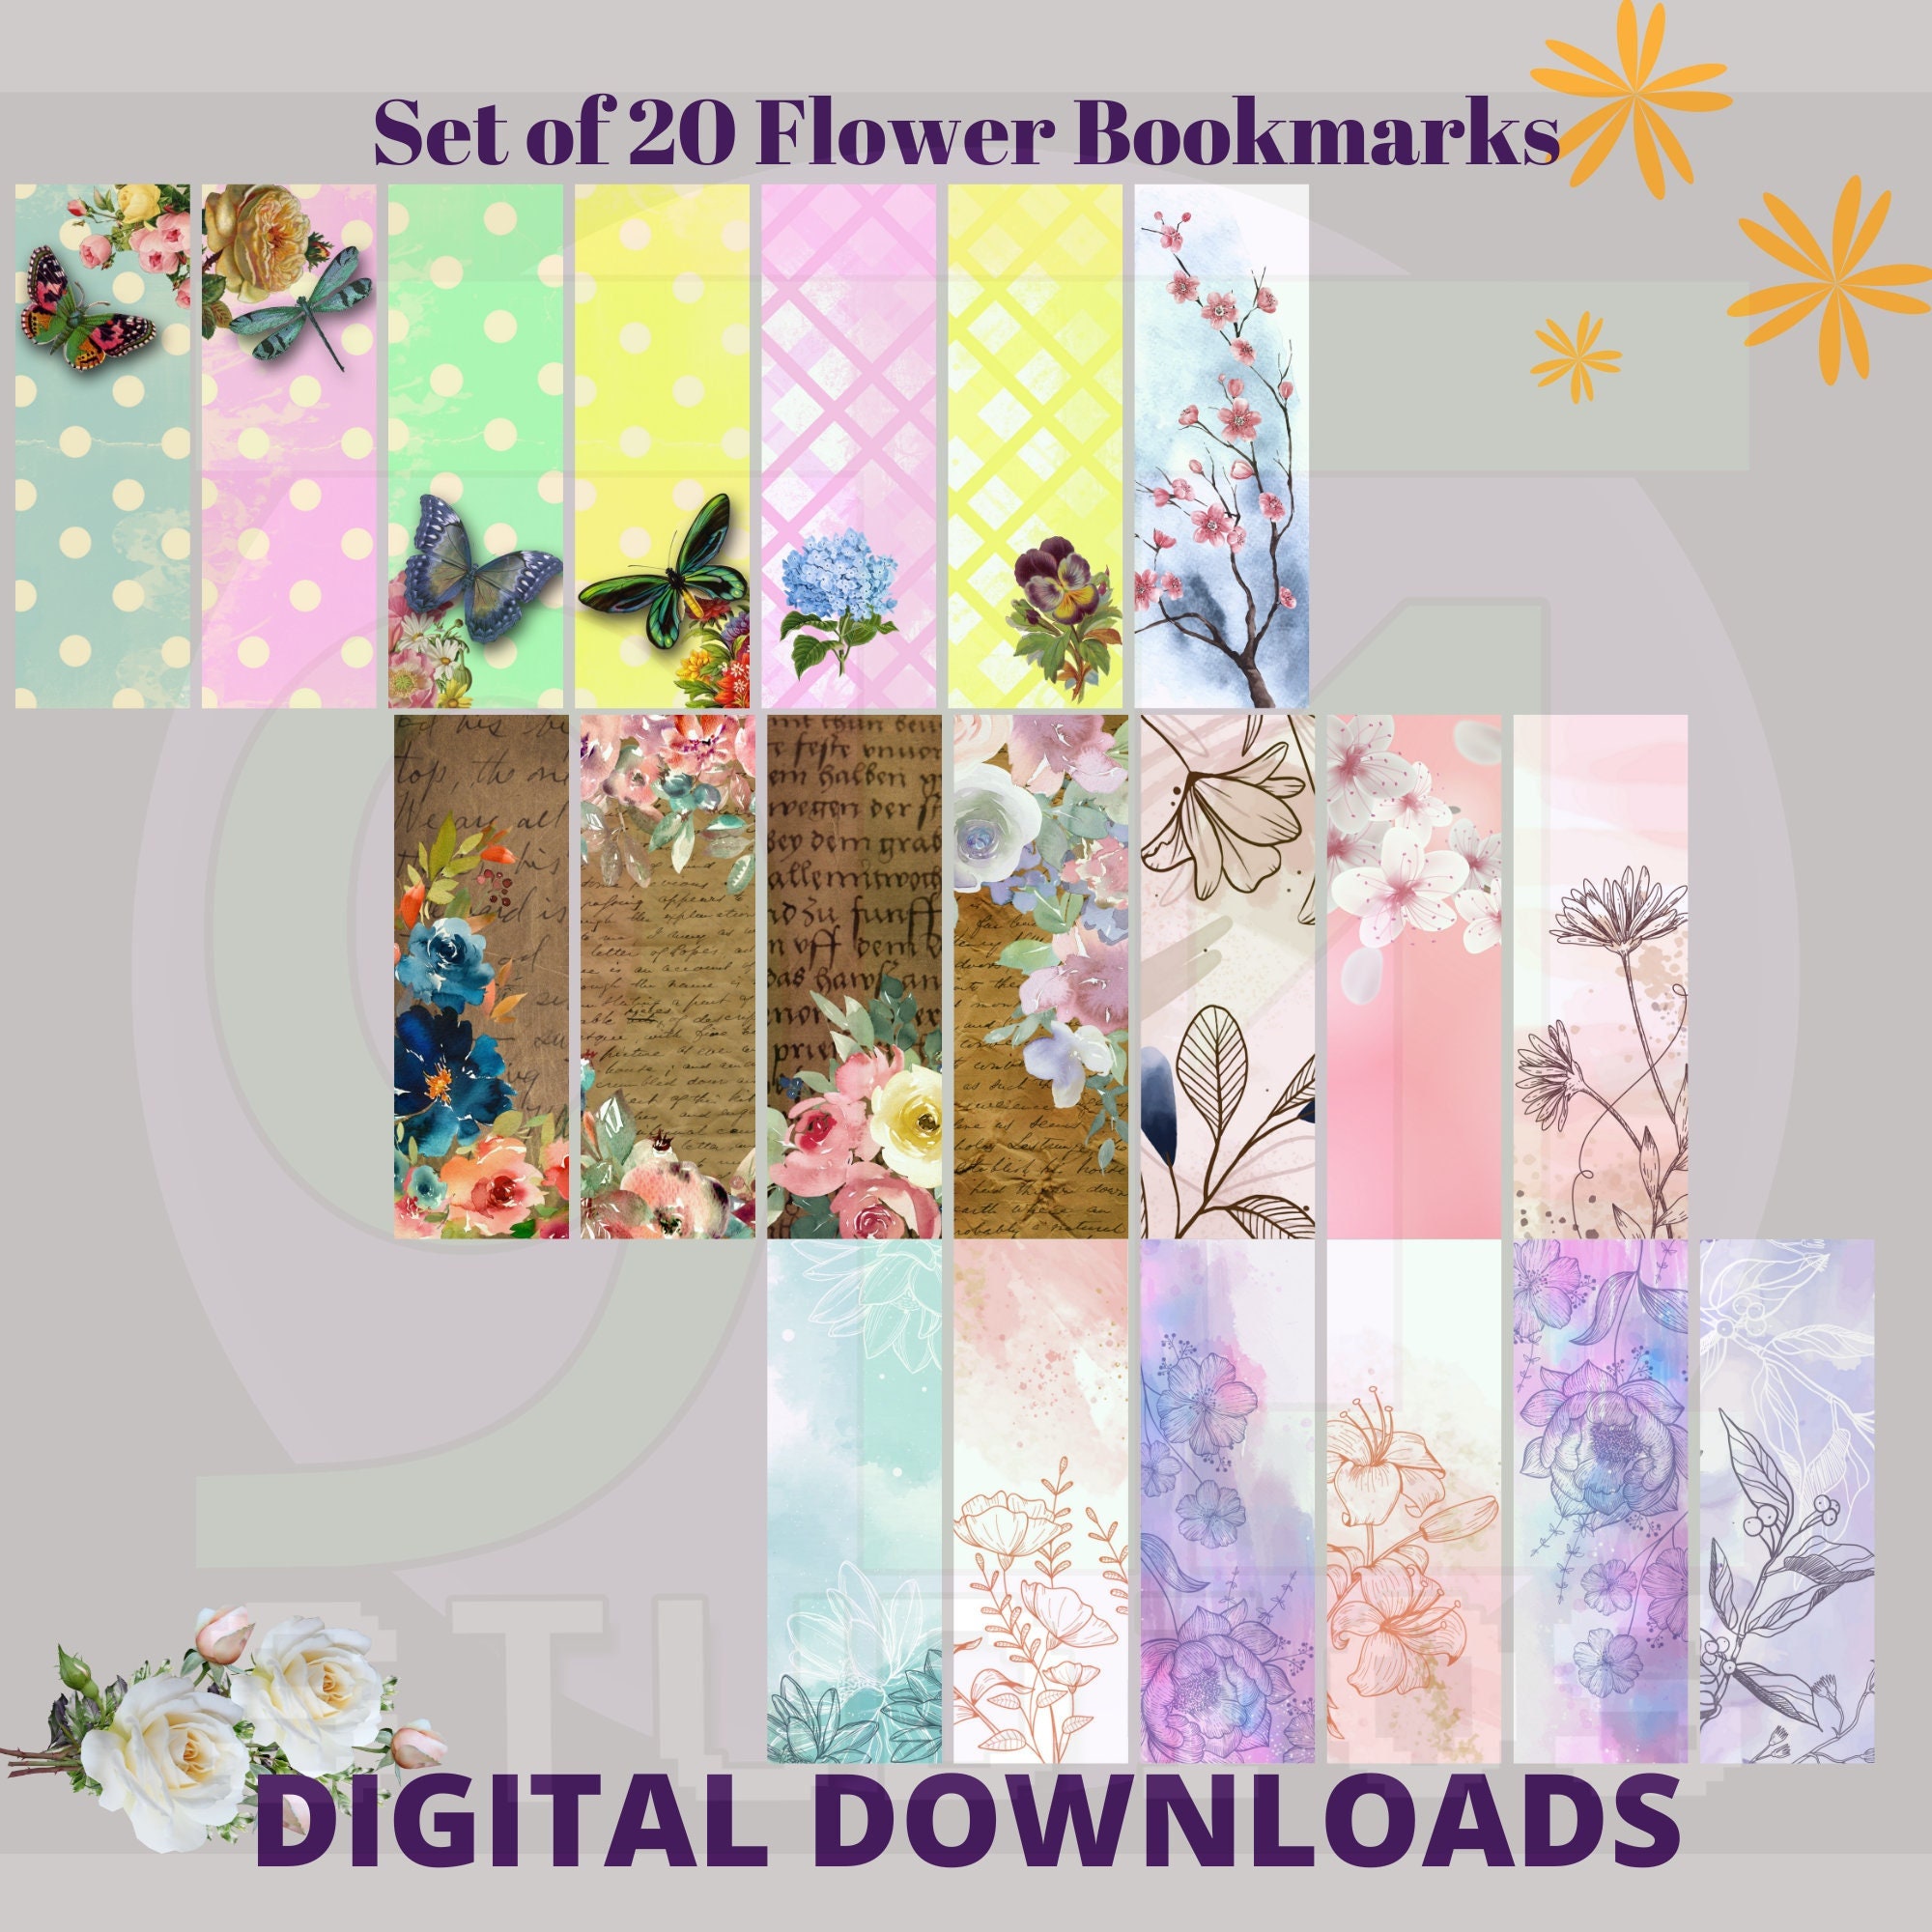 Set of 20 Flower Digital Bookmarks to Download and Print